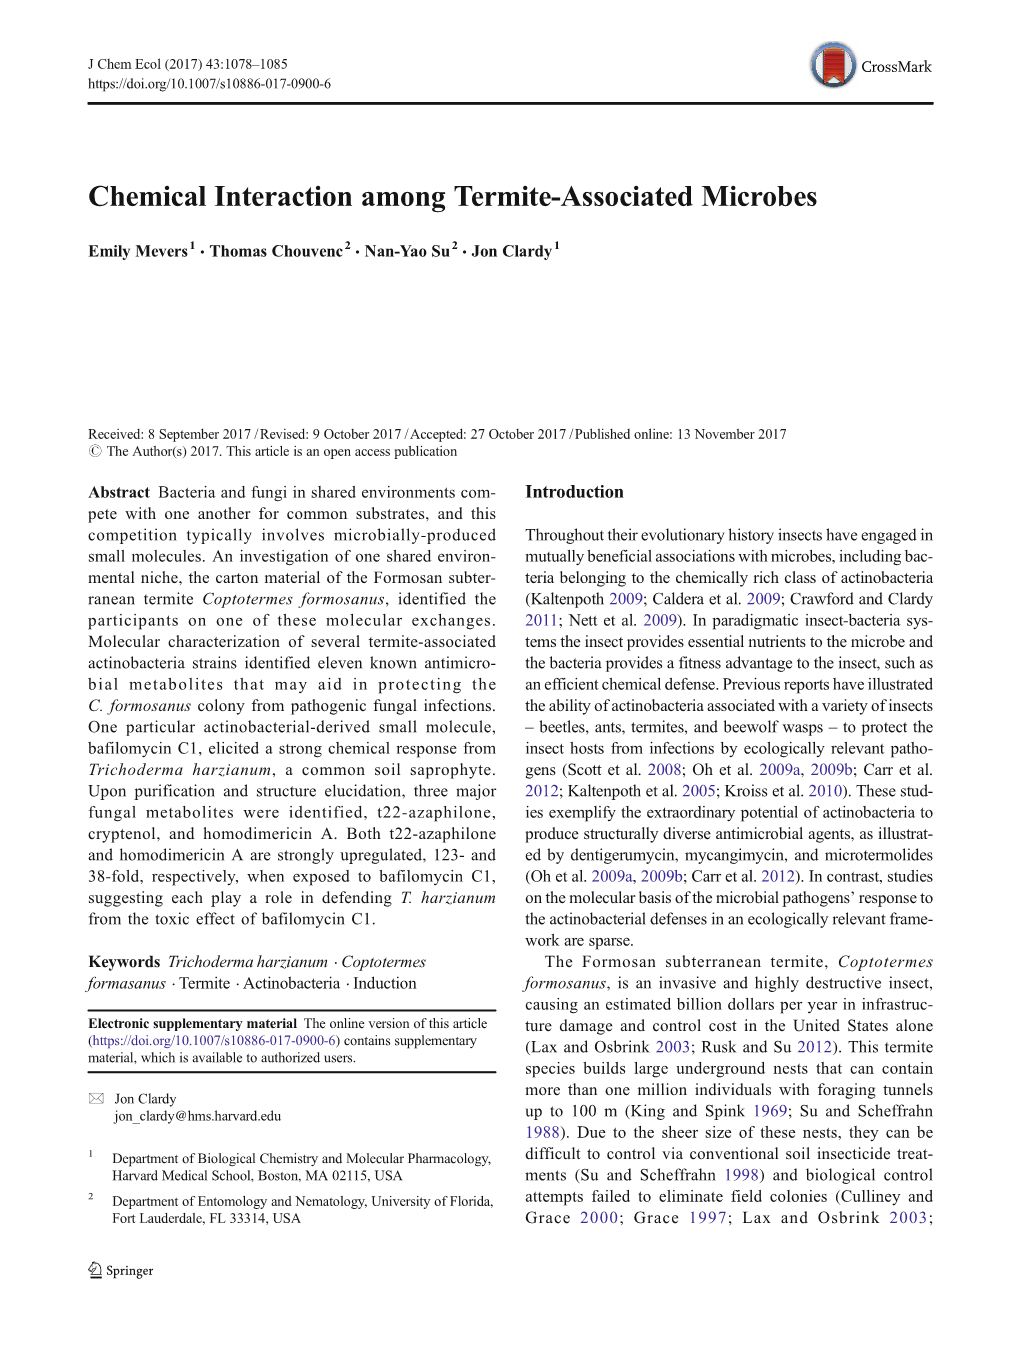 Chemical Interaction Among Termite-Associated Microbes